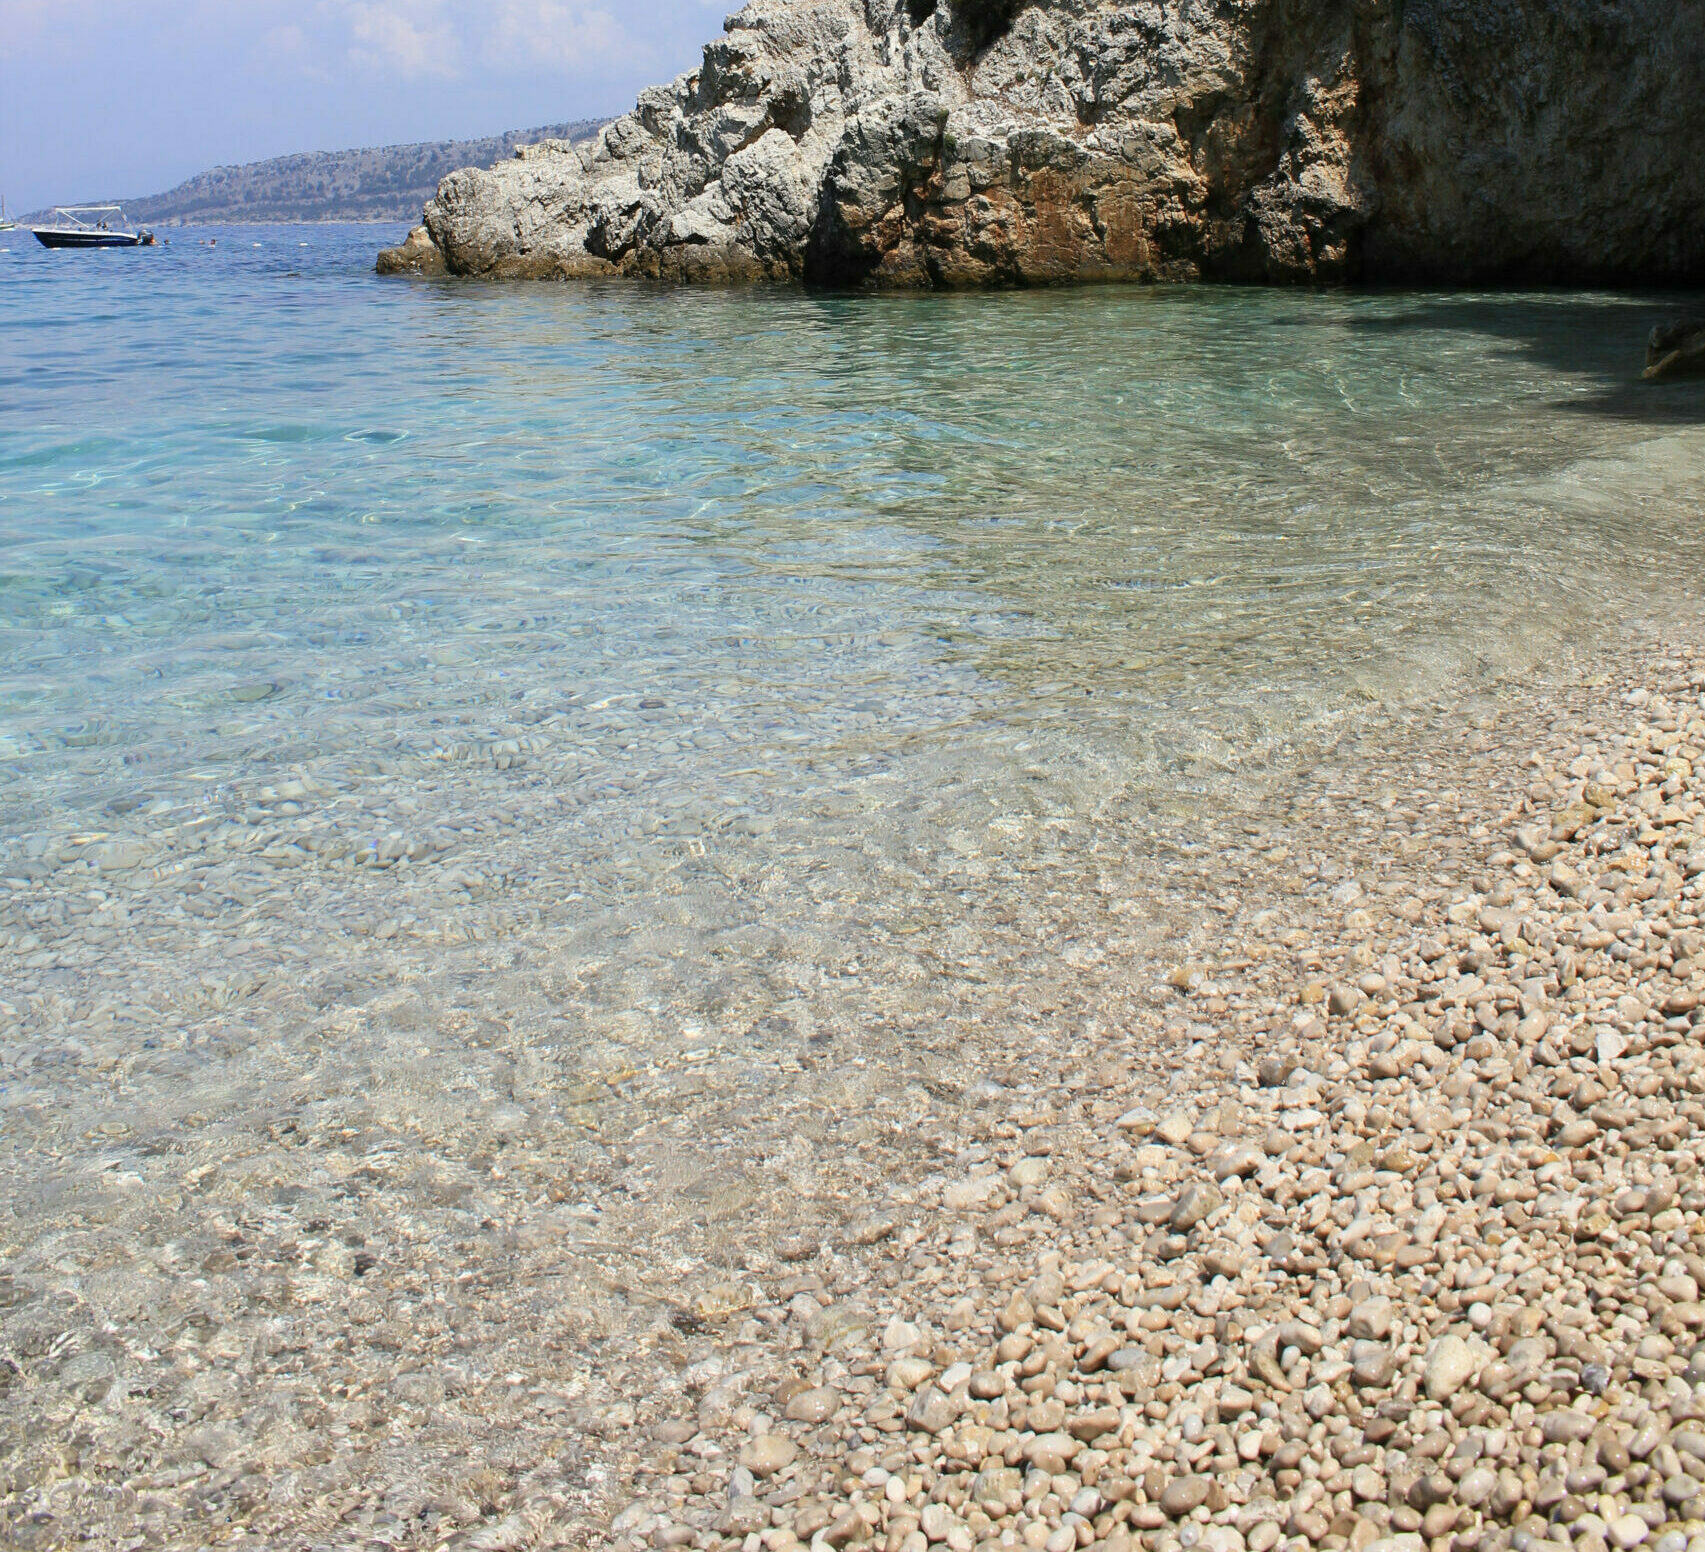 Pisina: The exotic beach with the clear waters